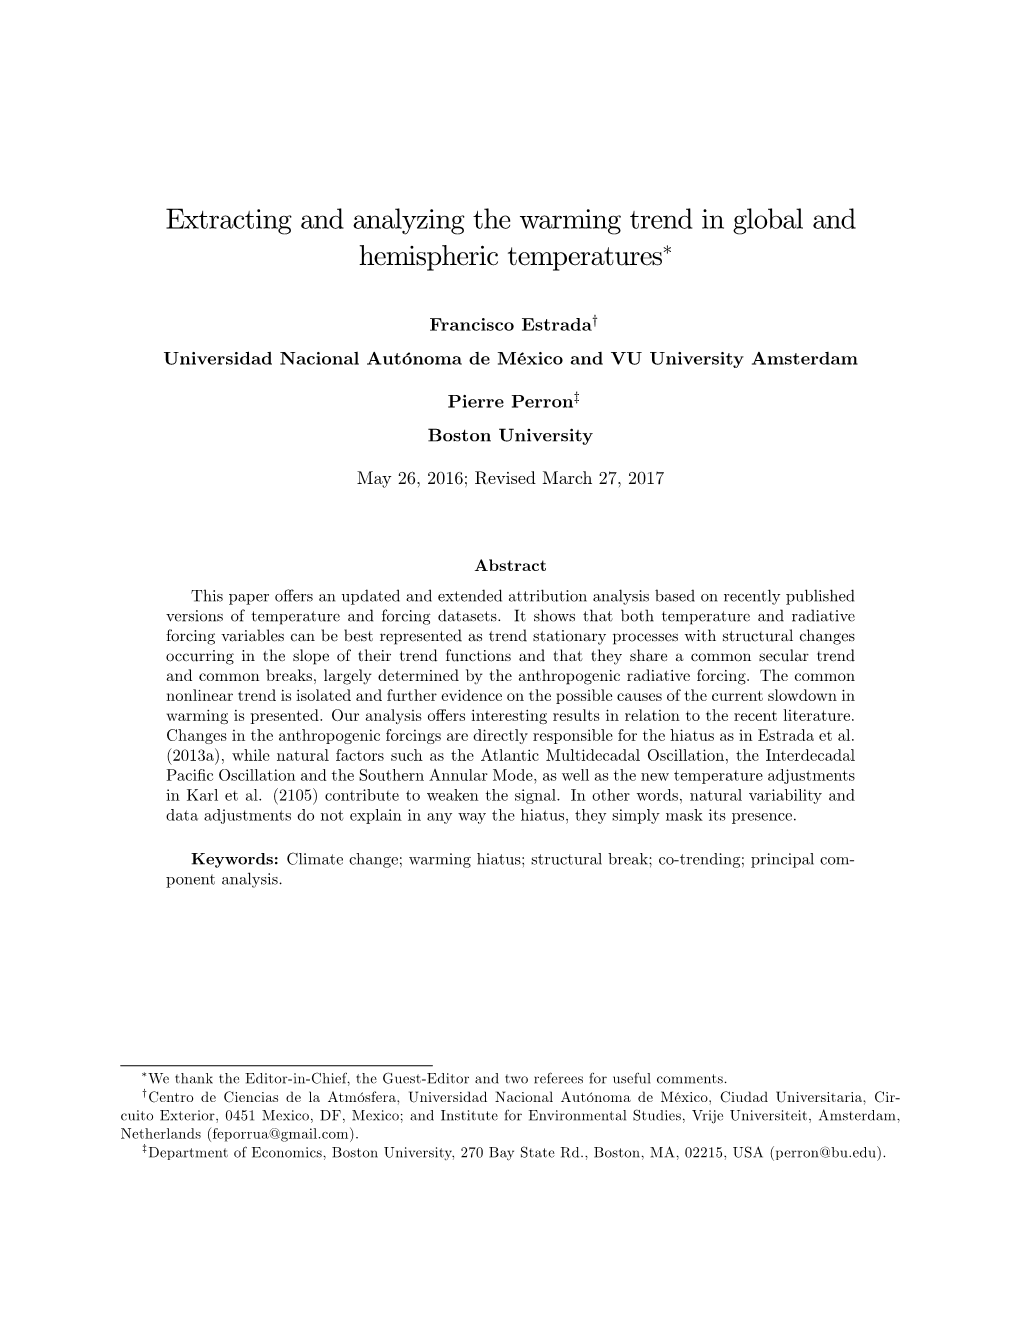 Extracting and Analyzing the Warming Trend in Global and Hemispheric Temperatures"